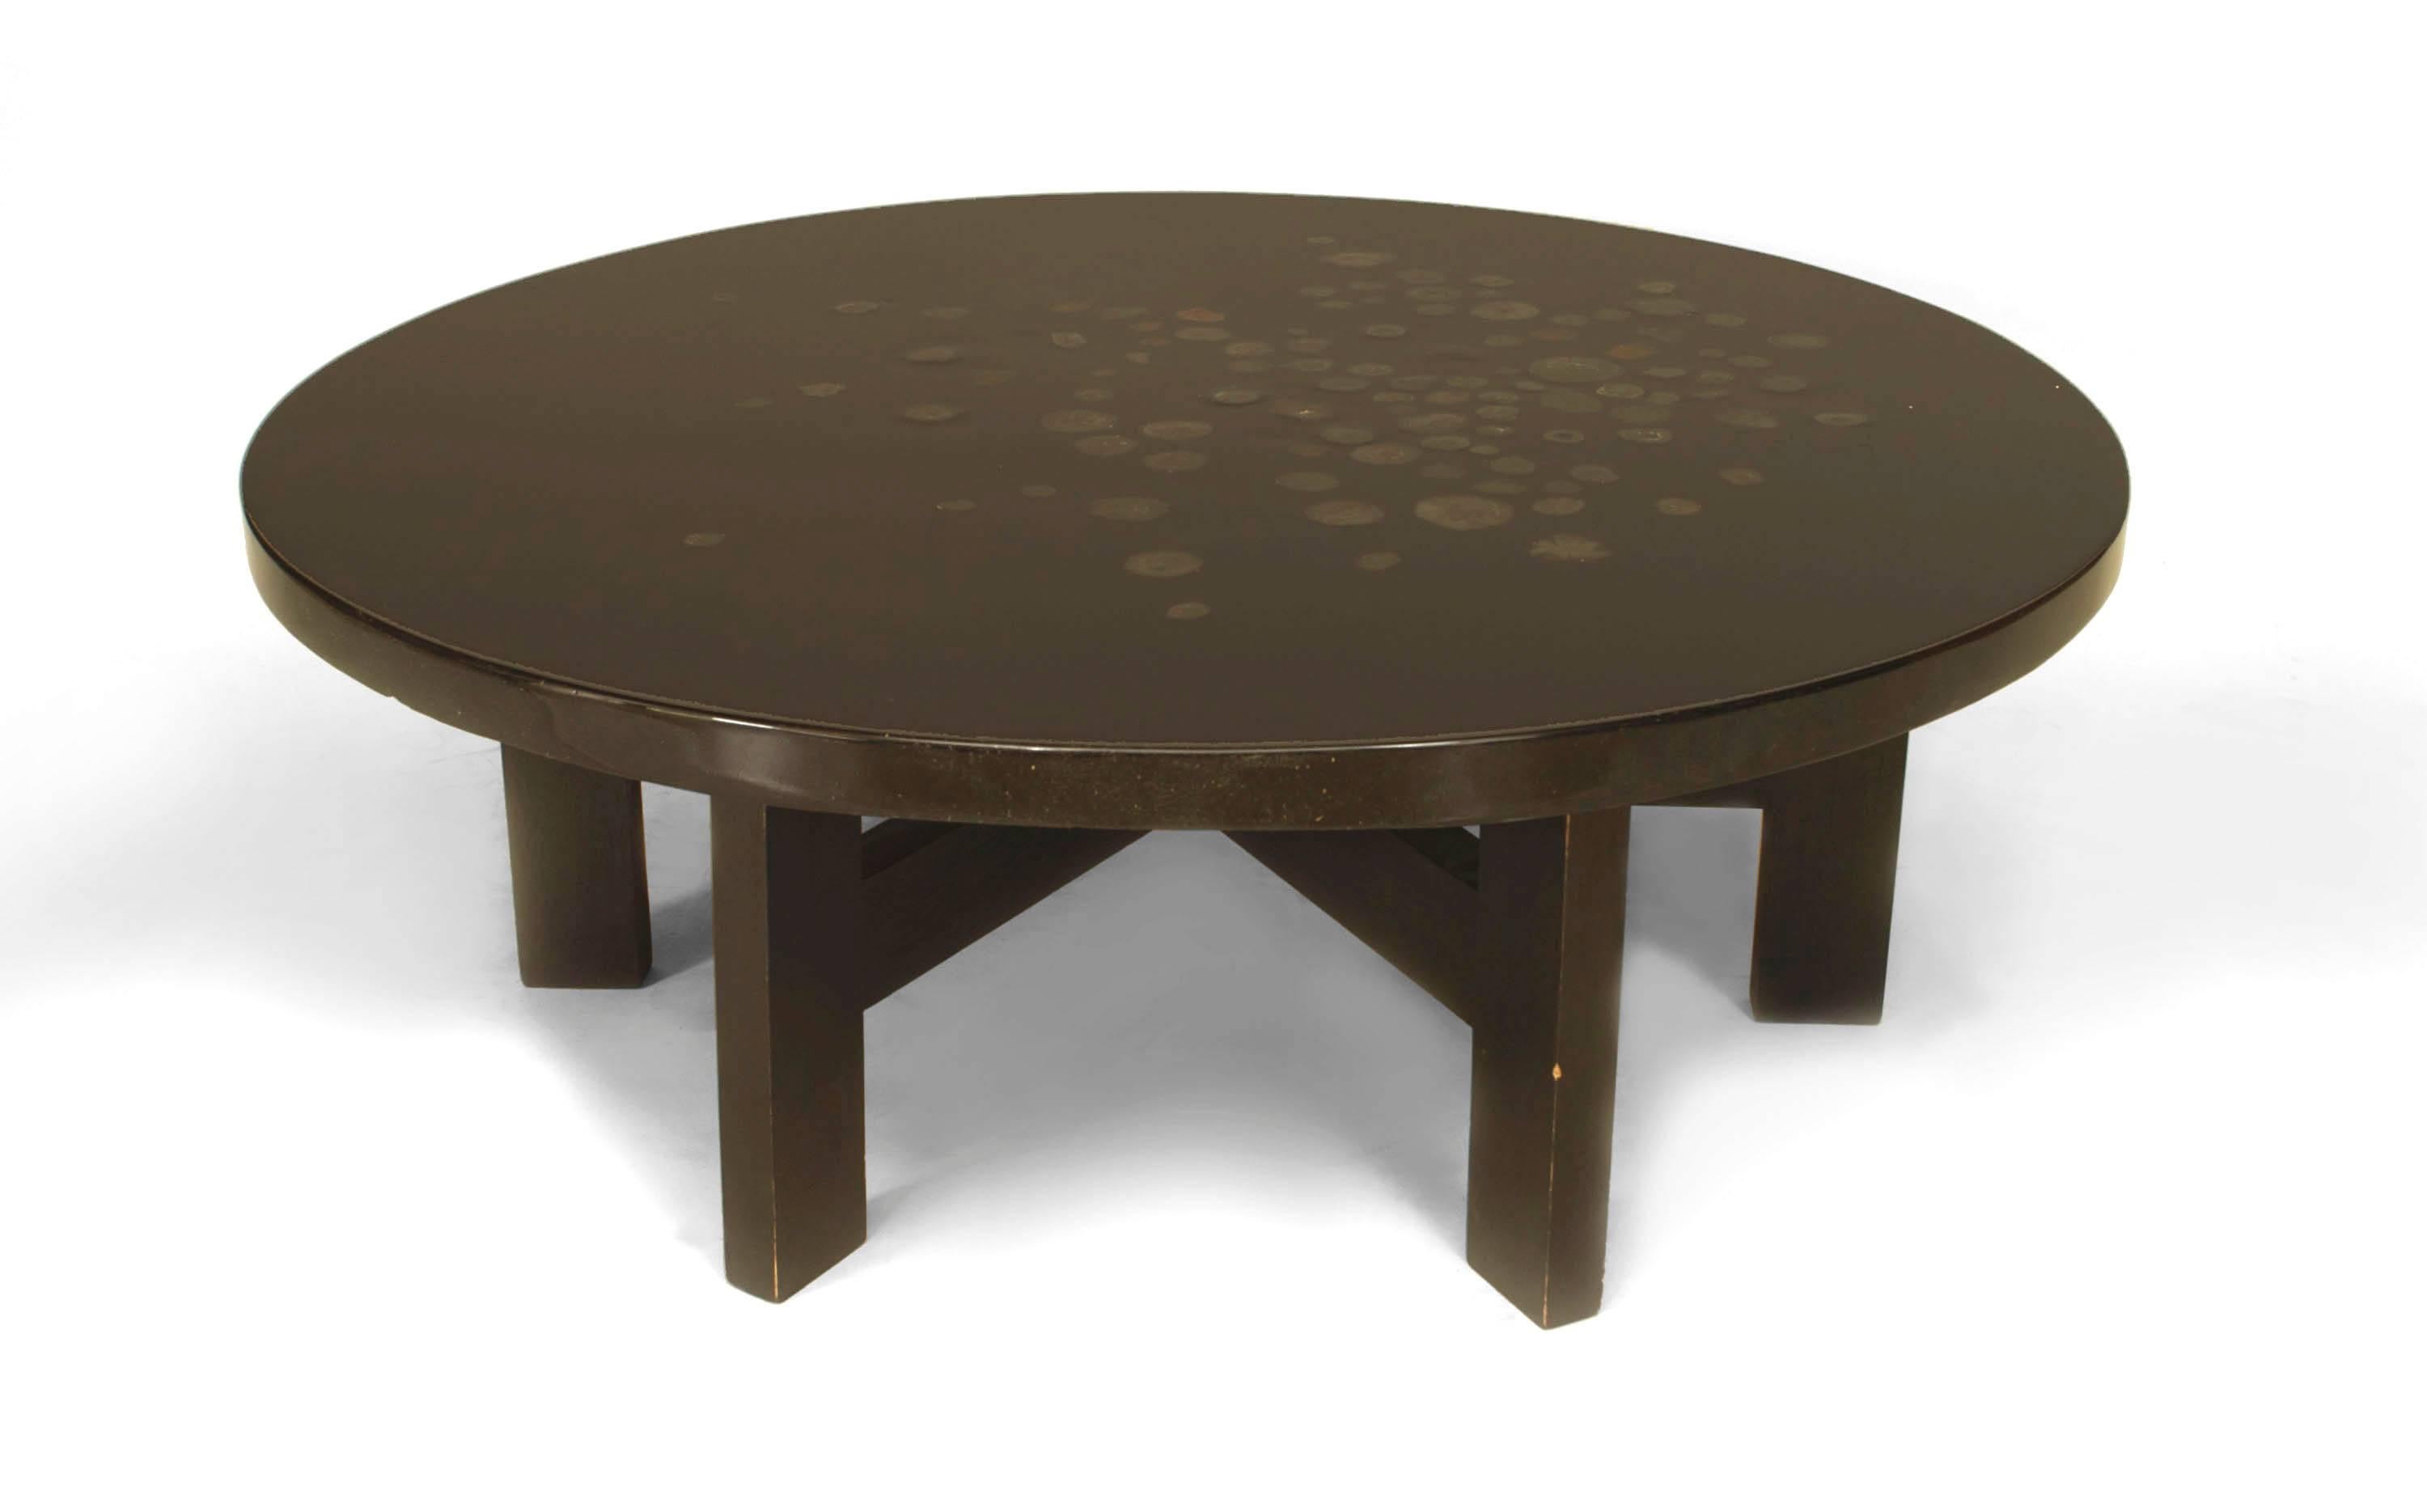 1970's French round coffee table signed by Chale. The table is crafted out of black lacquered resin and inlaid agate top supported on six ebonized wooden legs connected with a stretcher.